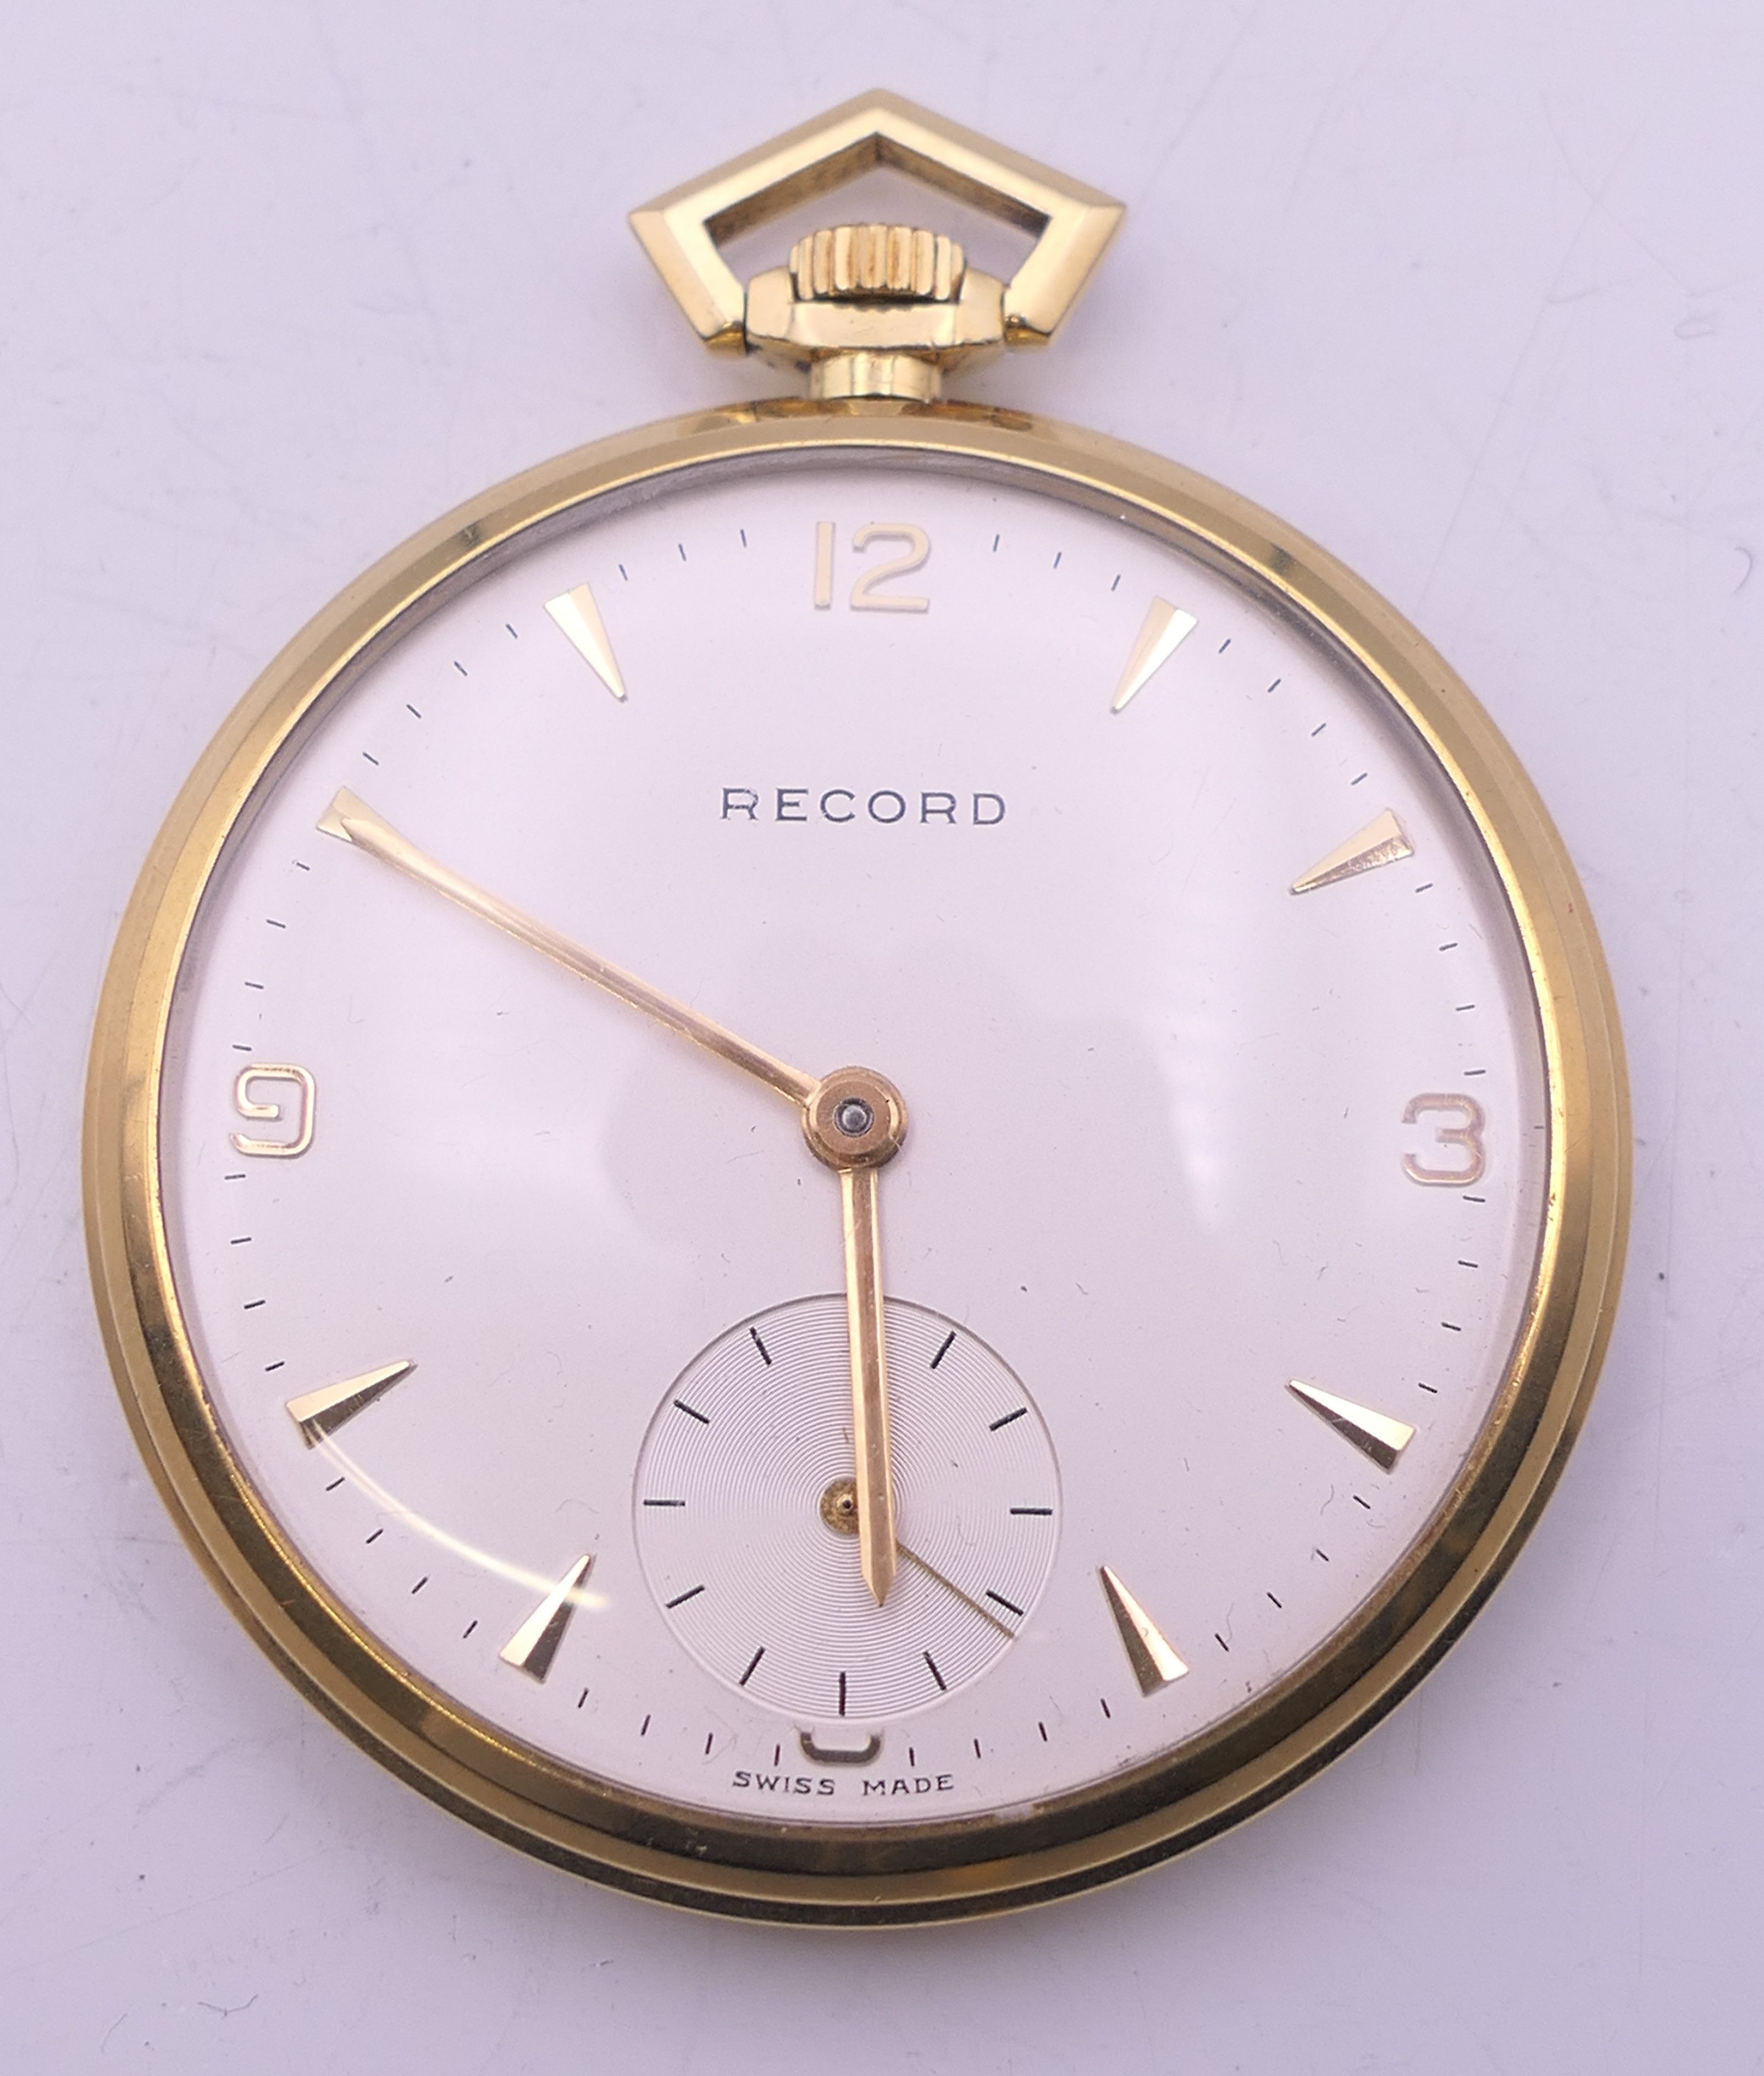 A 14 ct gold Record pocket watch. 4.5 cm diameter. 53.8 grammes total weight.